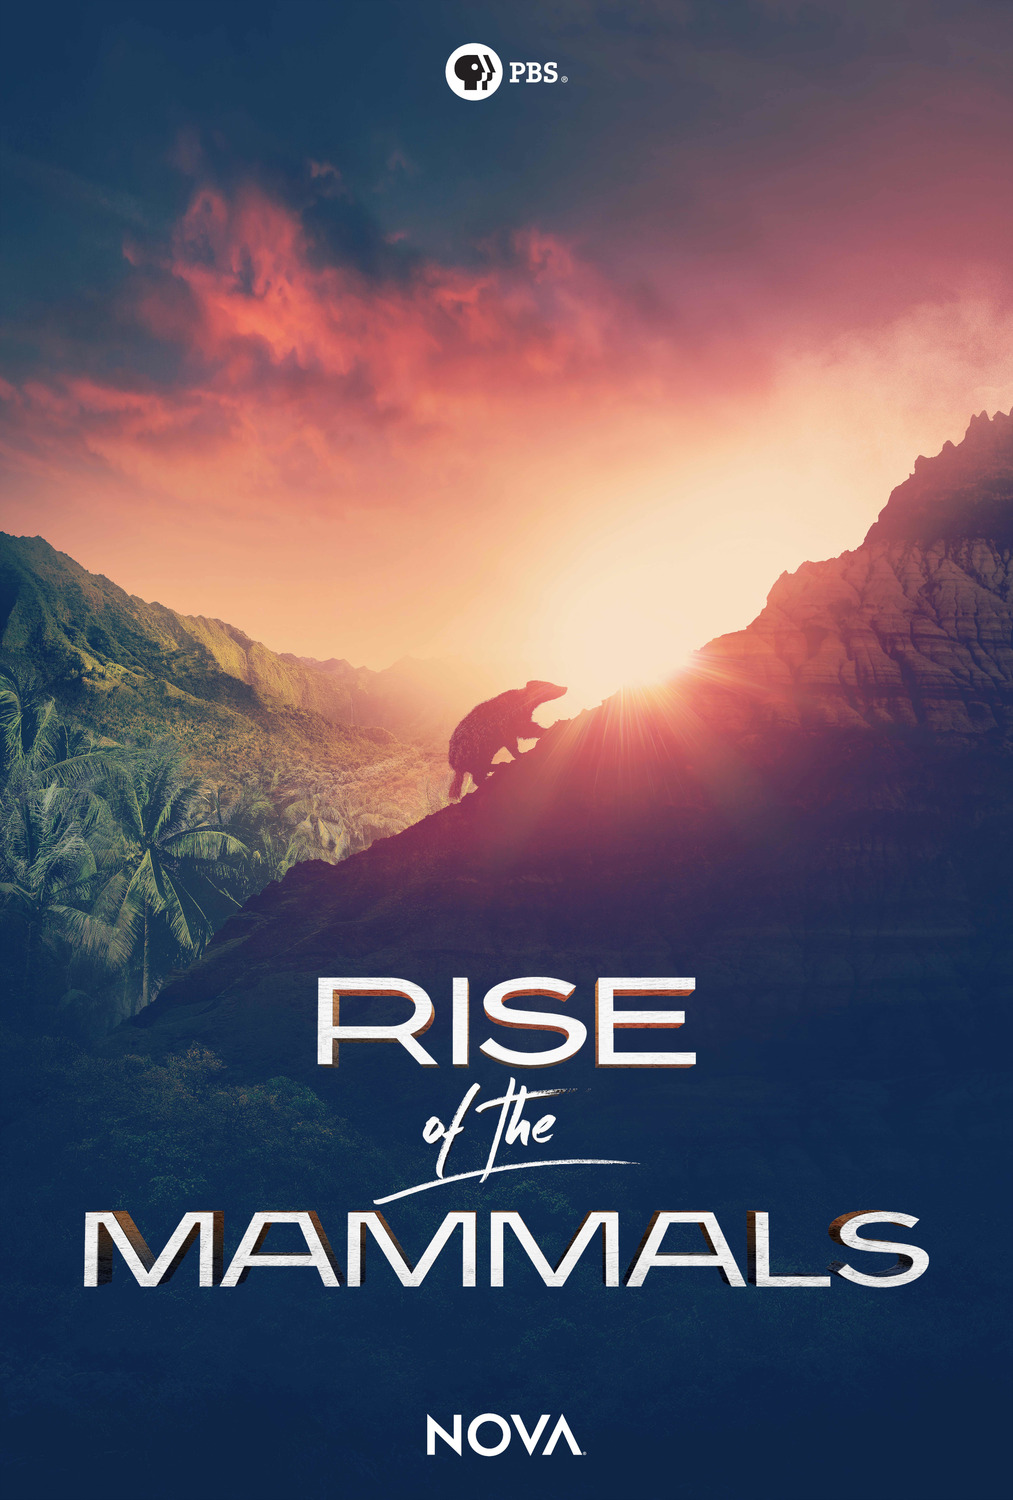 Extra Large TV Poster Image for Rise of the Mammals 